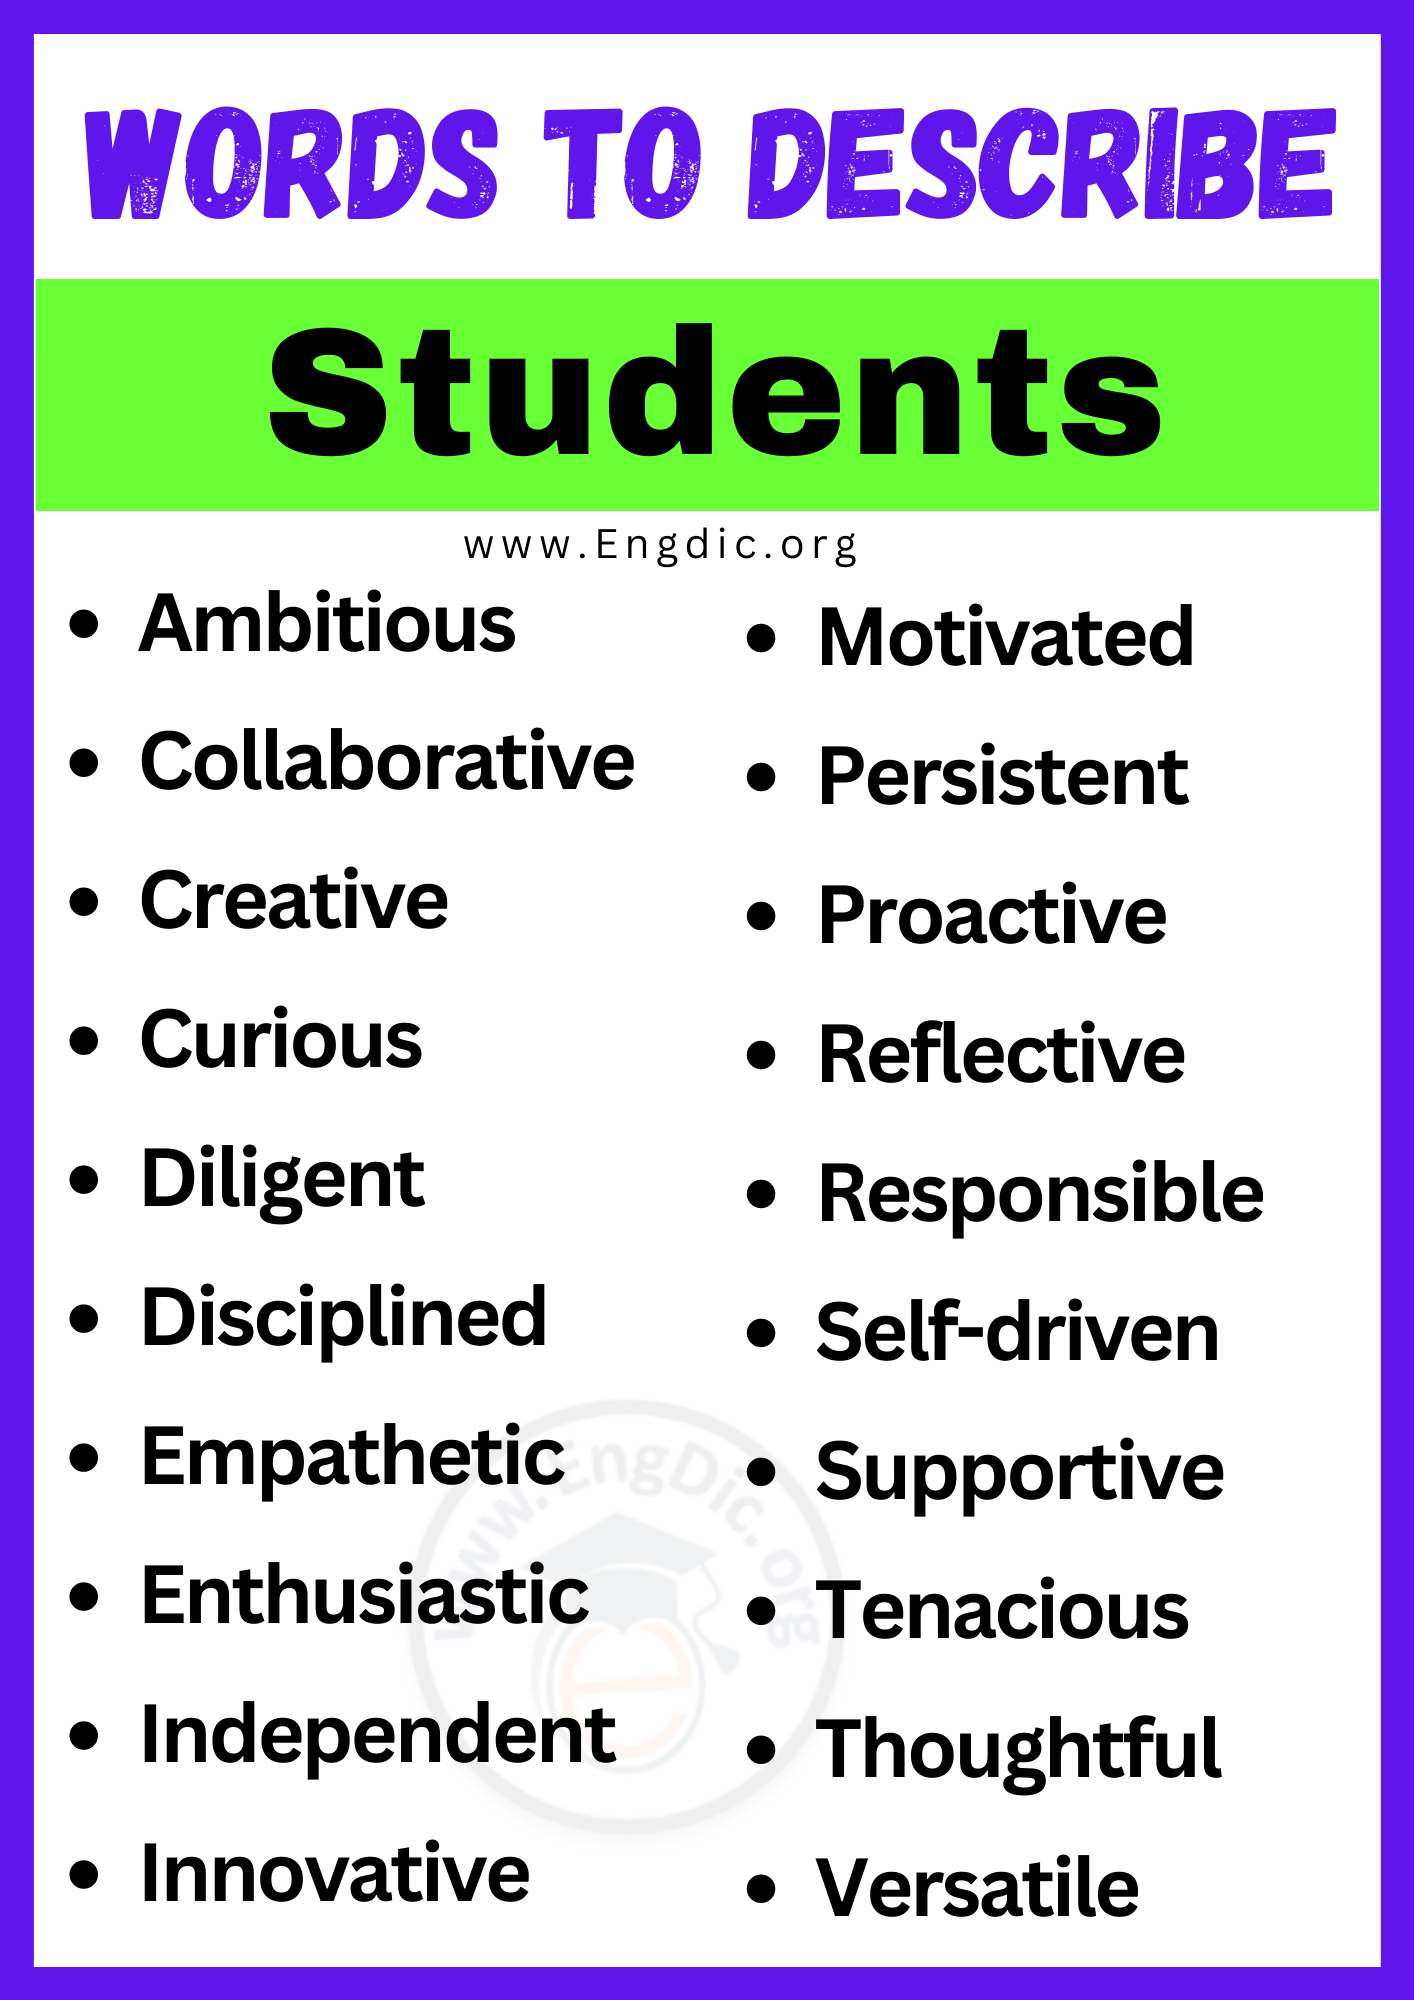 Words to Describe Students